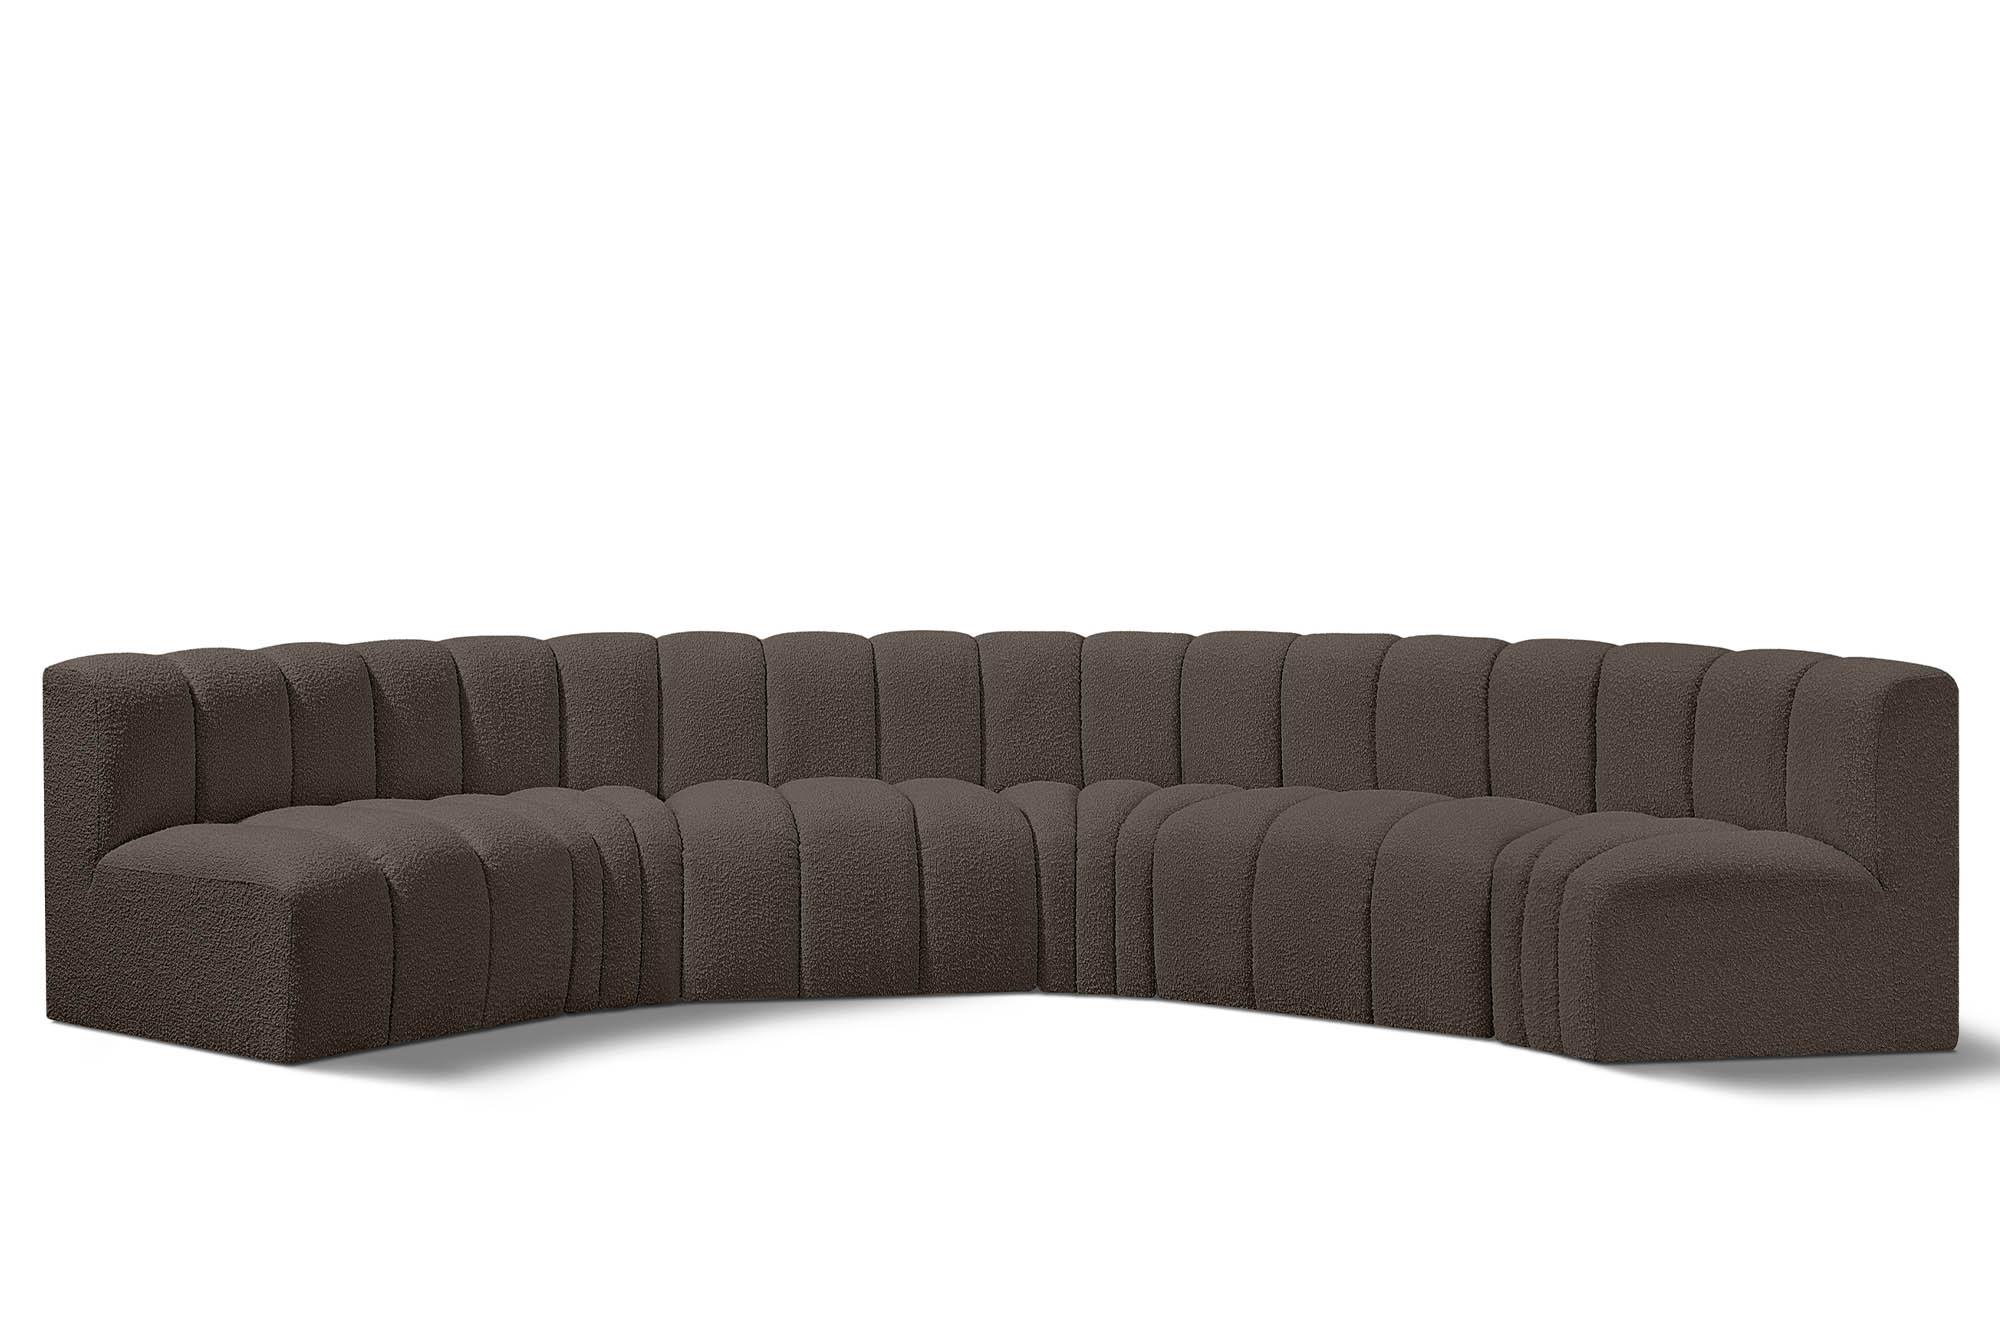 Contemporary, Modern Modular Sectional Sofa ARC 102Brown-S6B 102Brown-S6B in Brown 